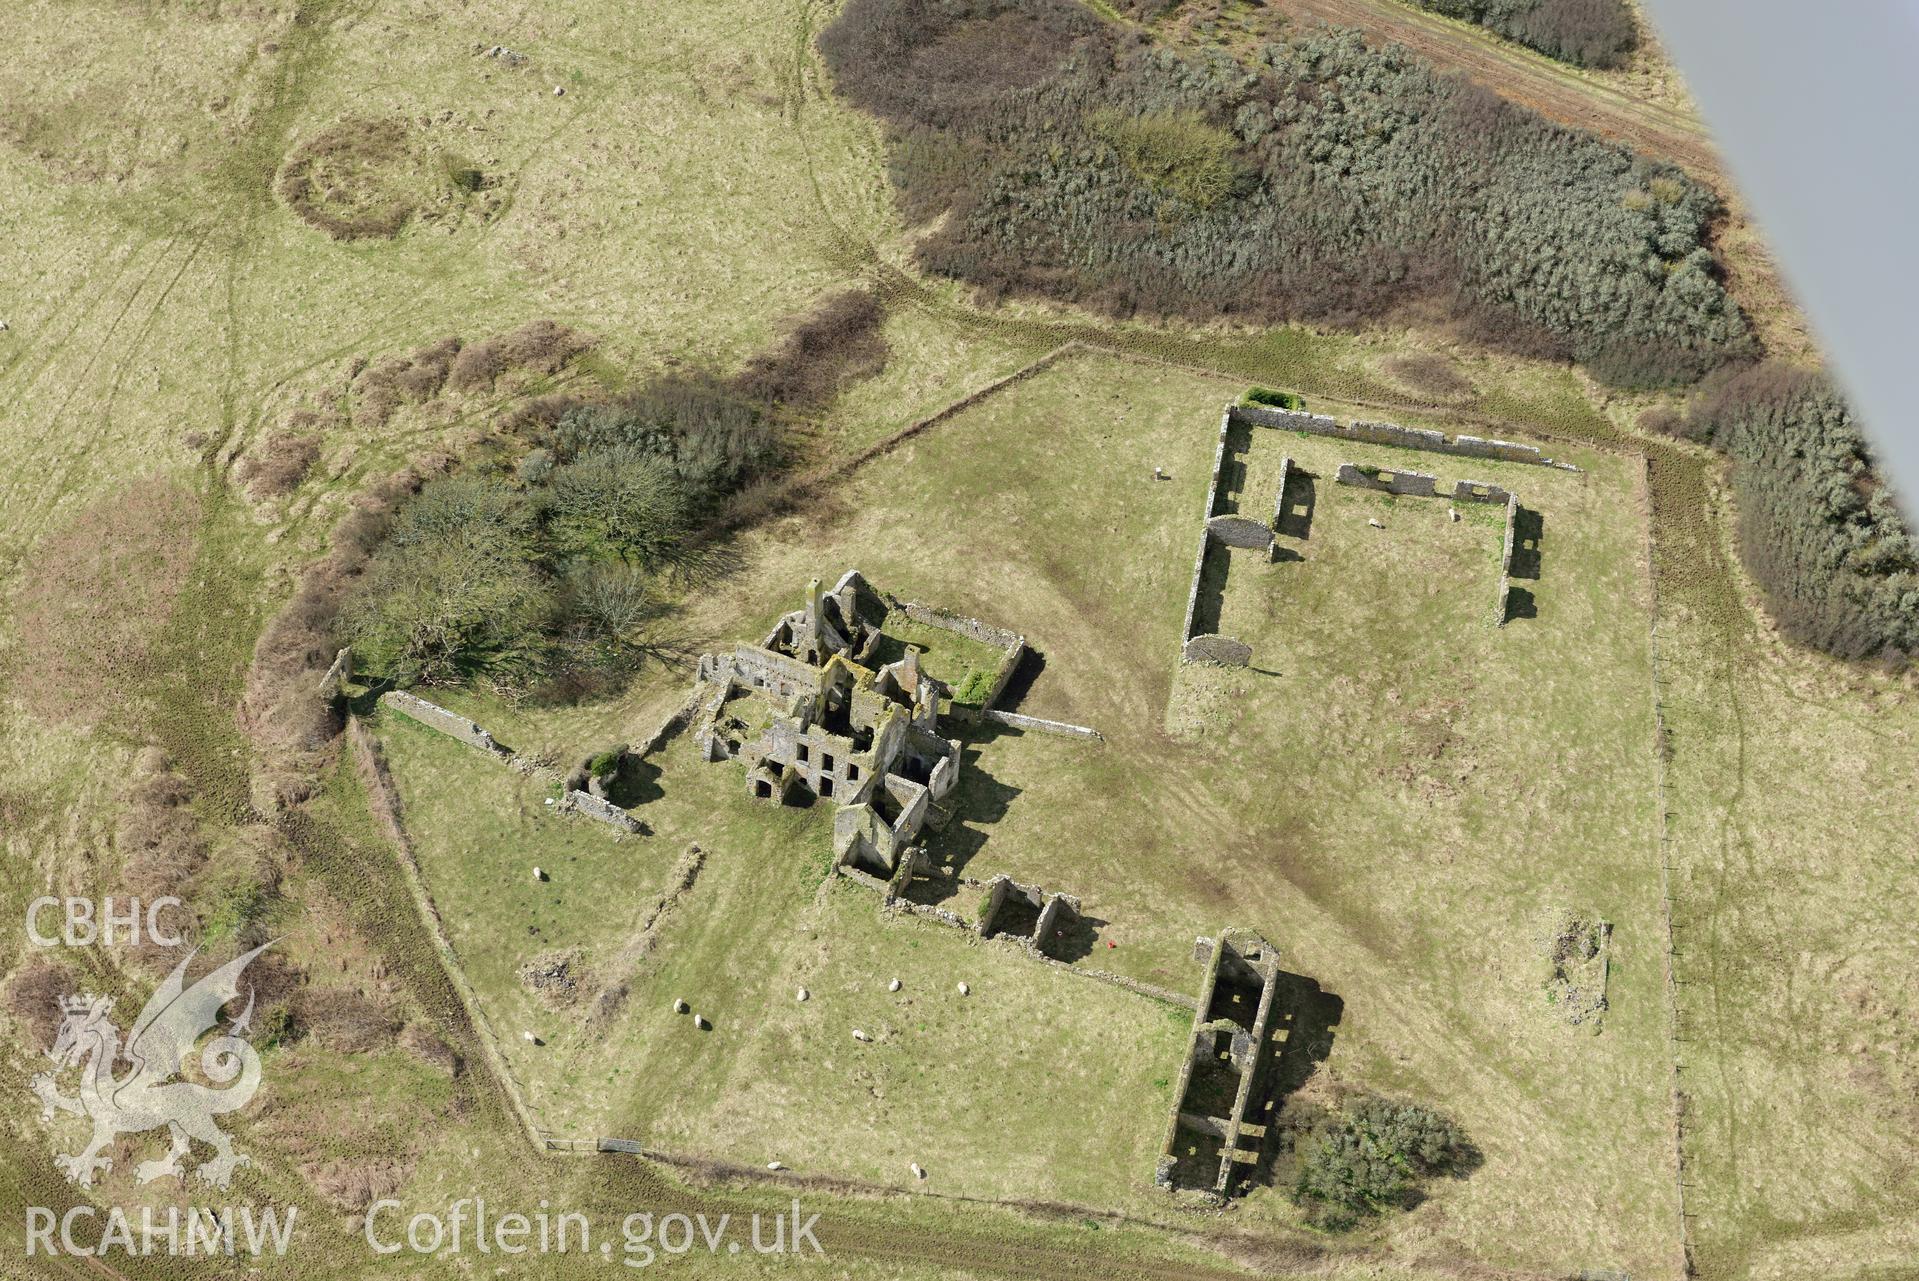 Pricaston Farmhouse. Baseline aerial reconnaissance survey for the CHERISH Project. ? Crown: CHERISH PROJECT 2018. Produced with EU funds through the Ireland Wales Co-operation Programme 2014-2020. All material made freely available through the Open Government Licence.